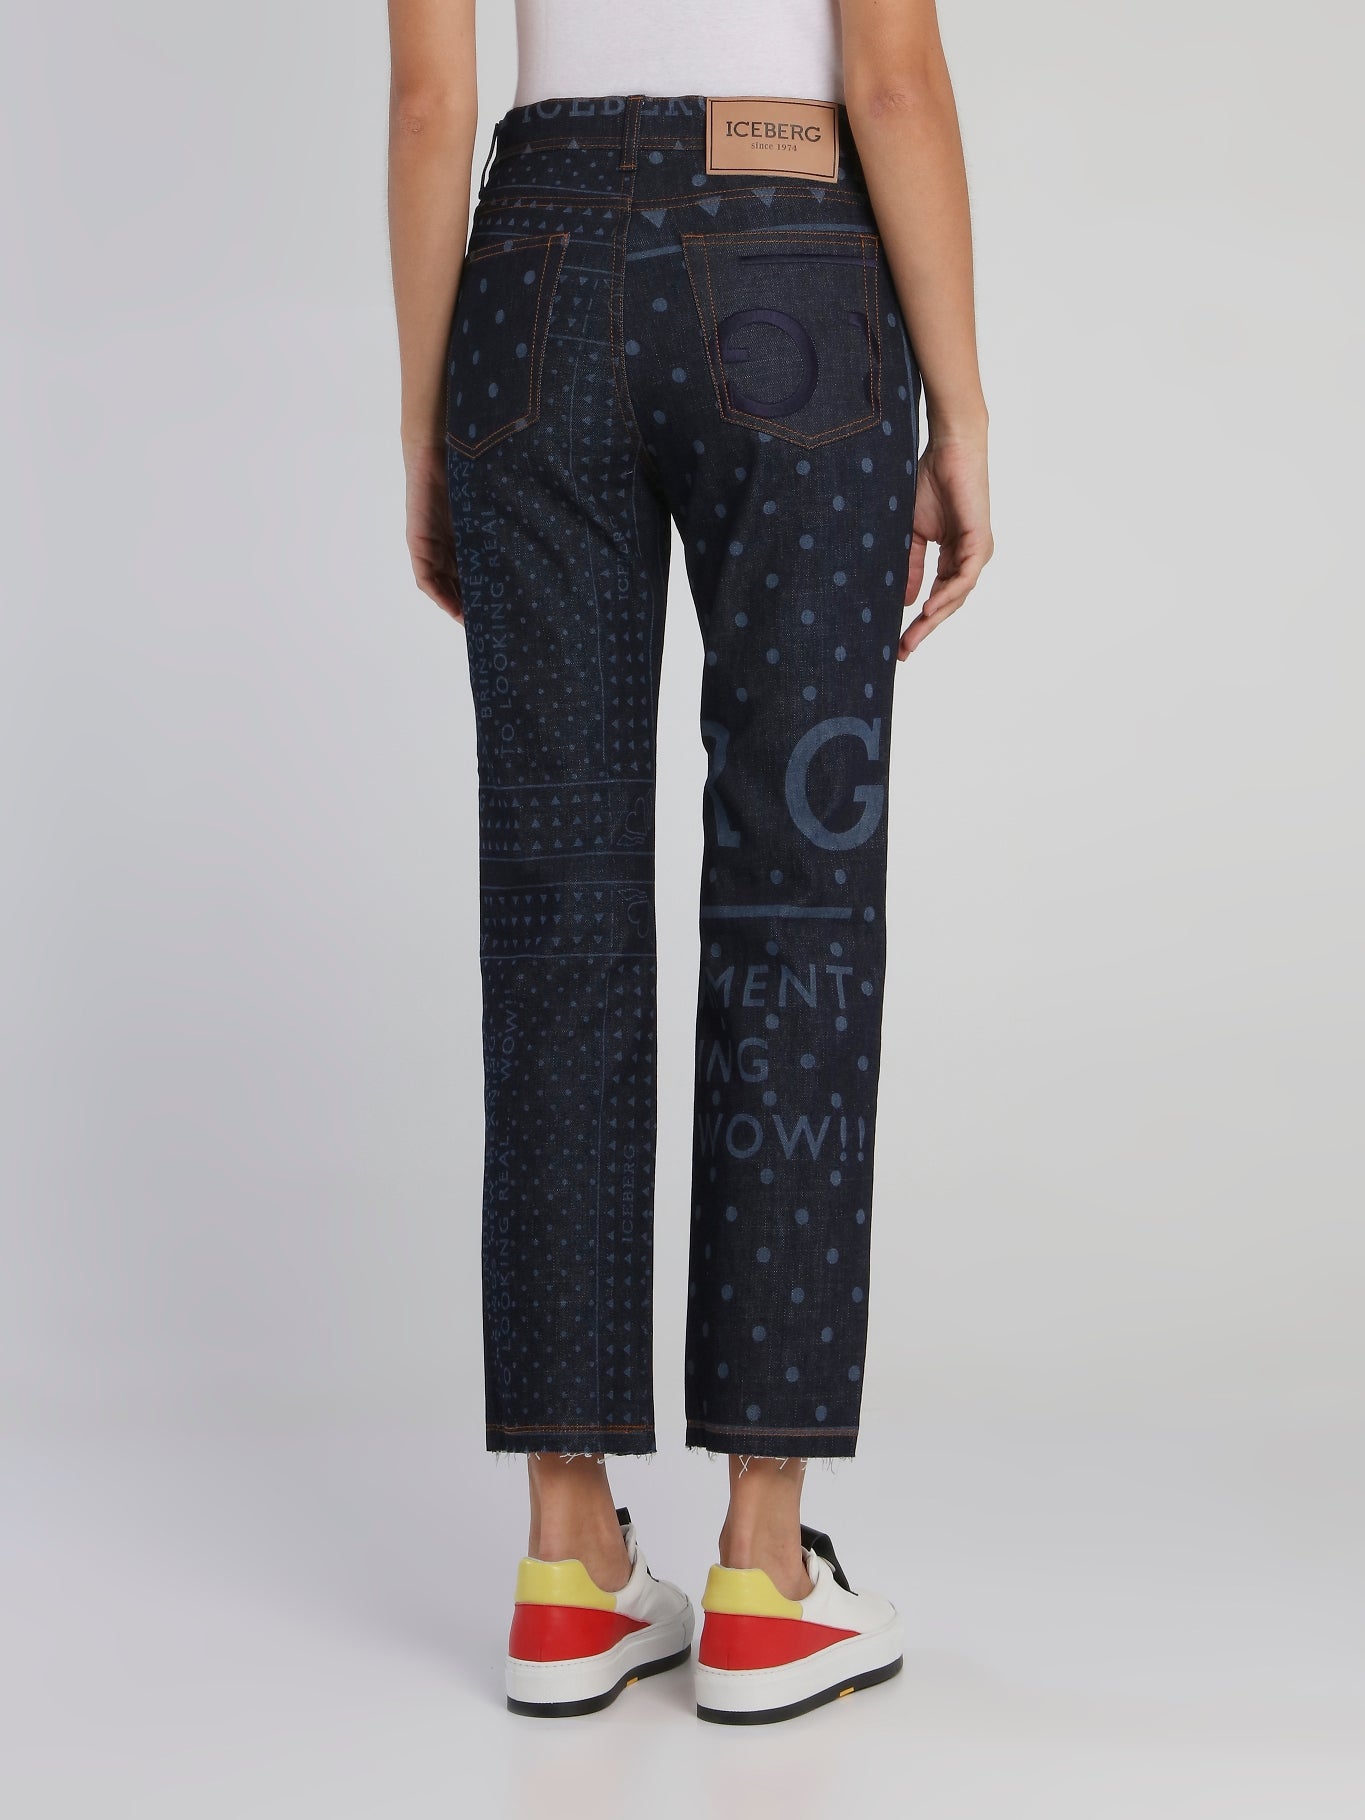 Embroidered Statement Straight Cut Jeans